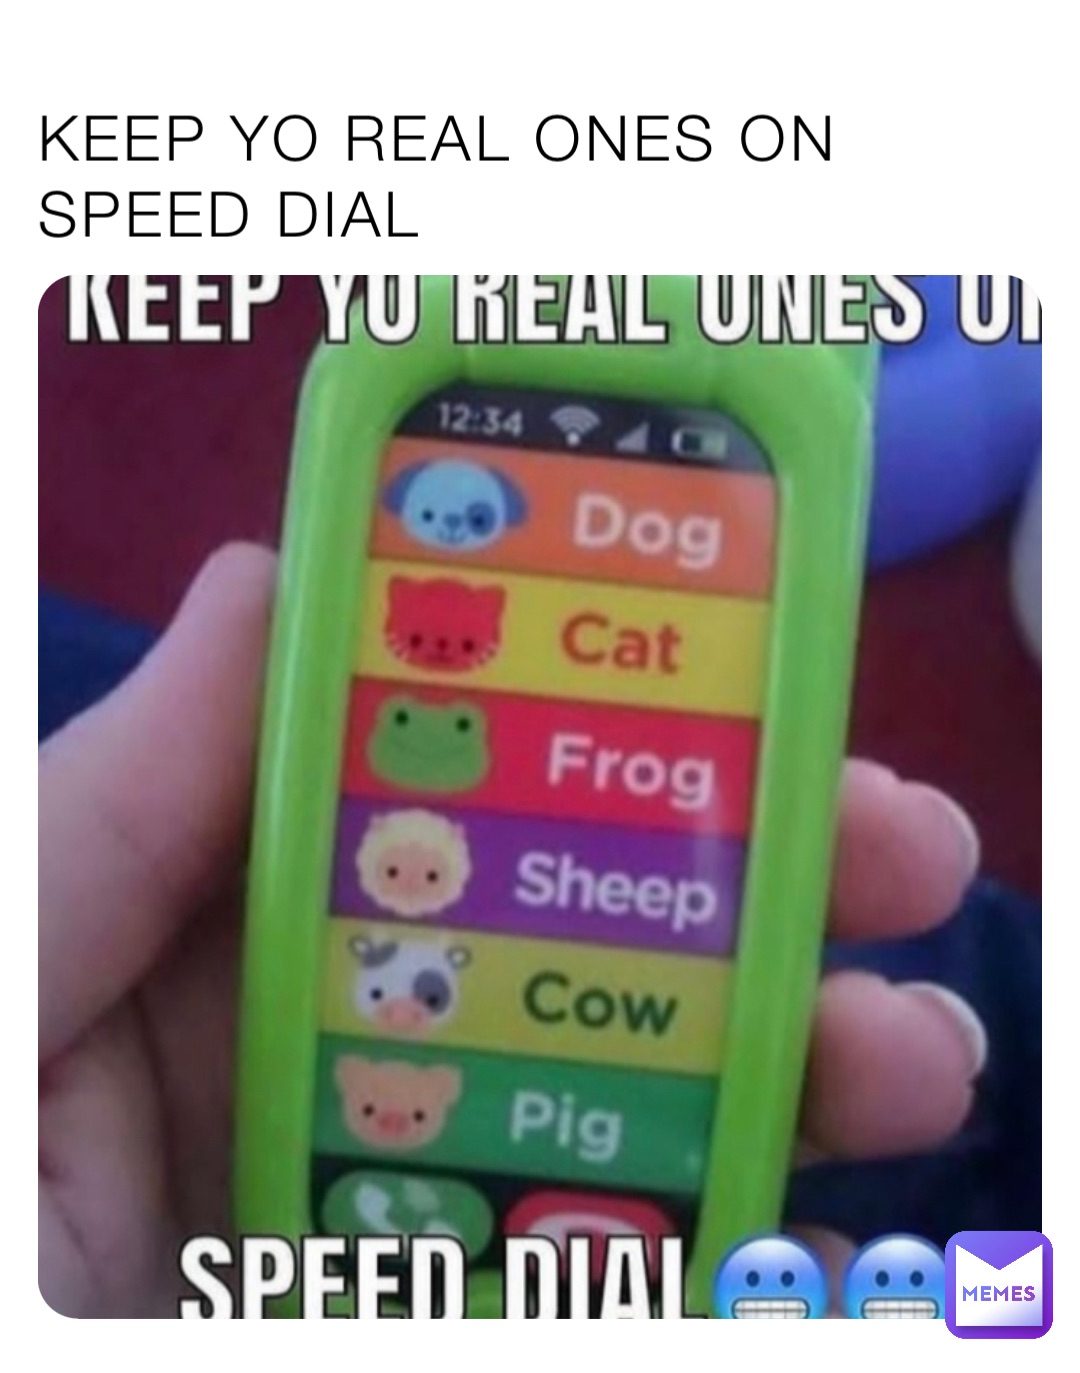 KEEP YO REAL ONES ON SPEED DIAL